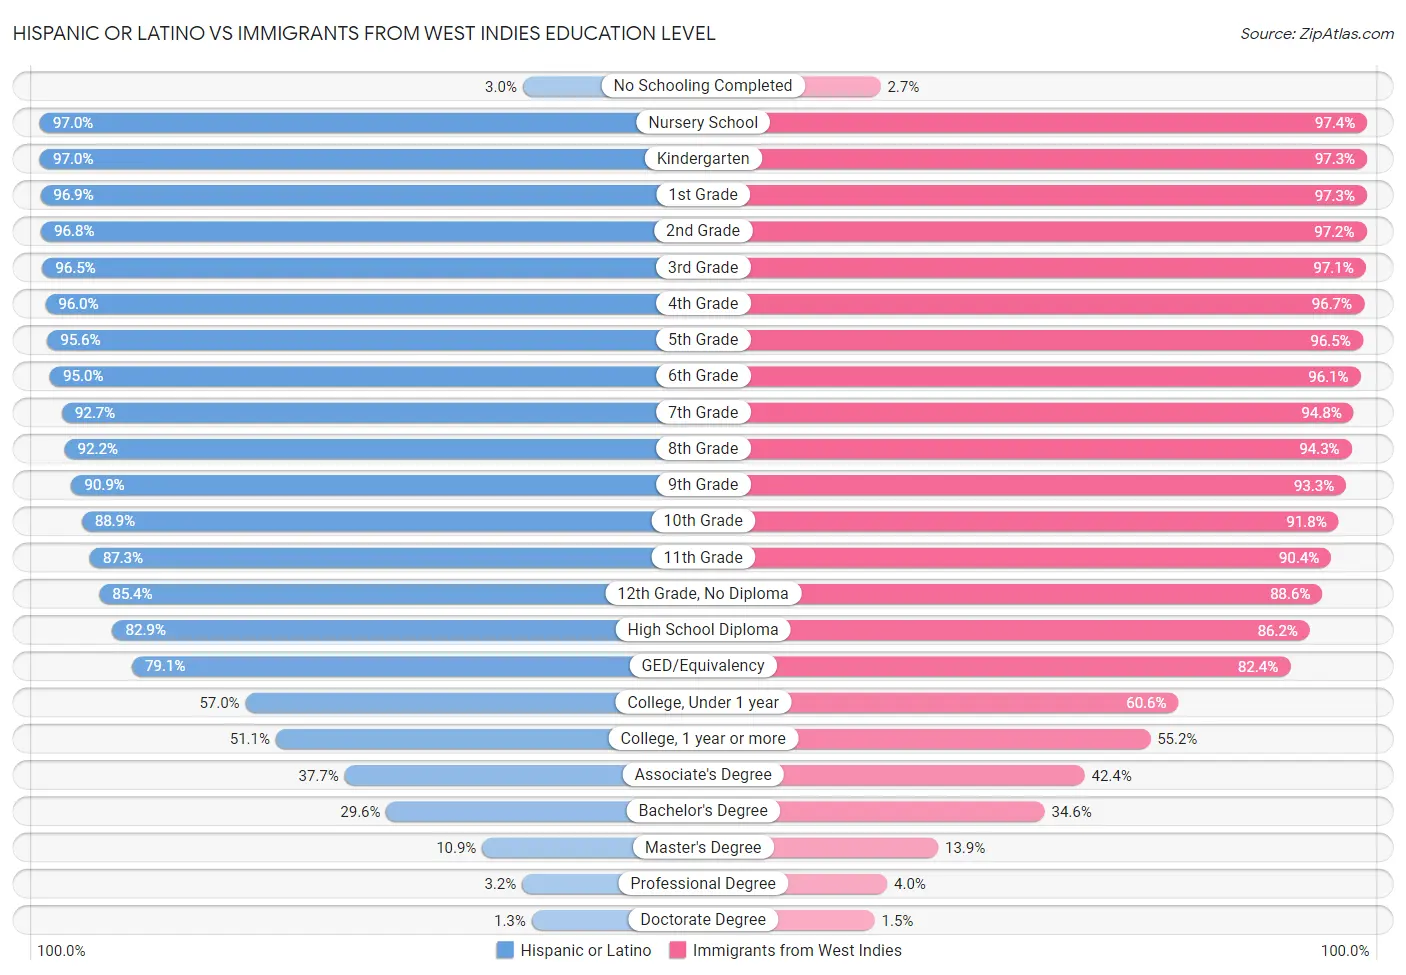 Hispanic or Latino vs Immigrants from West Indies Education Level